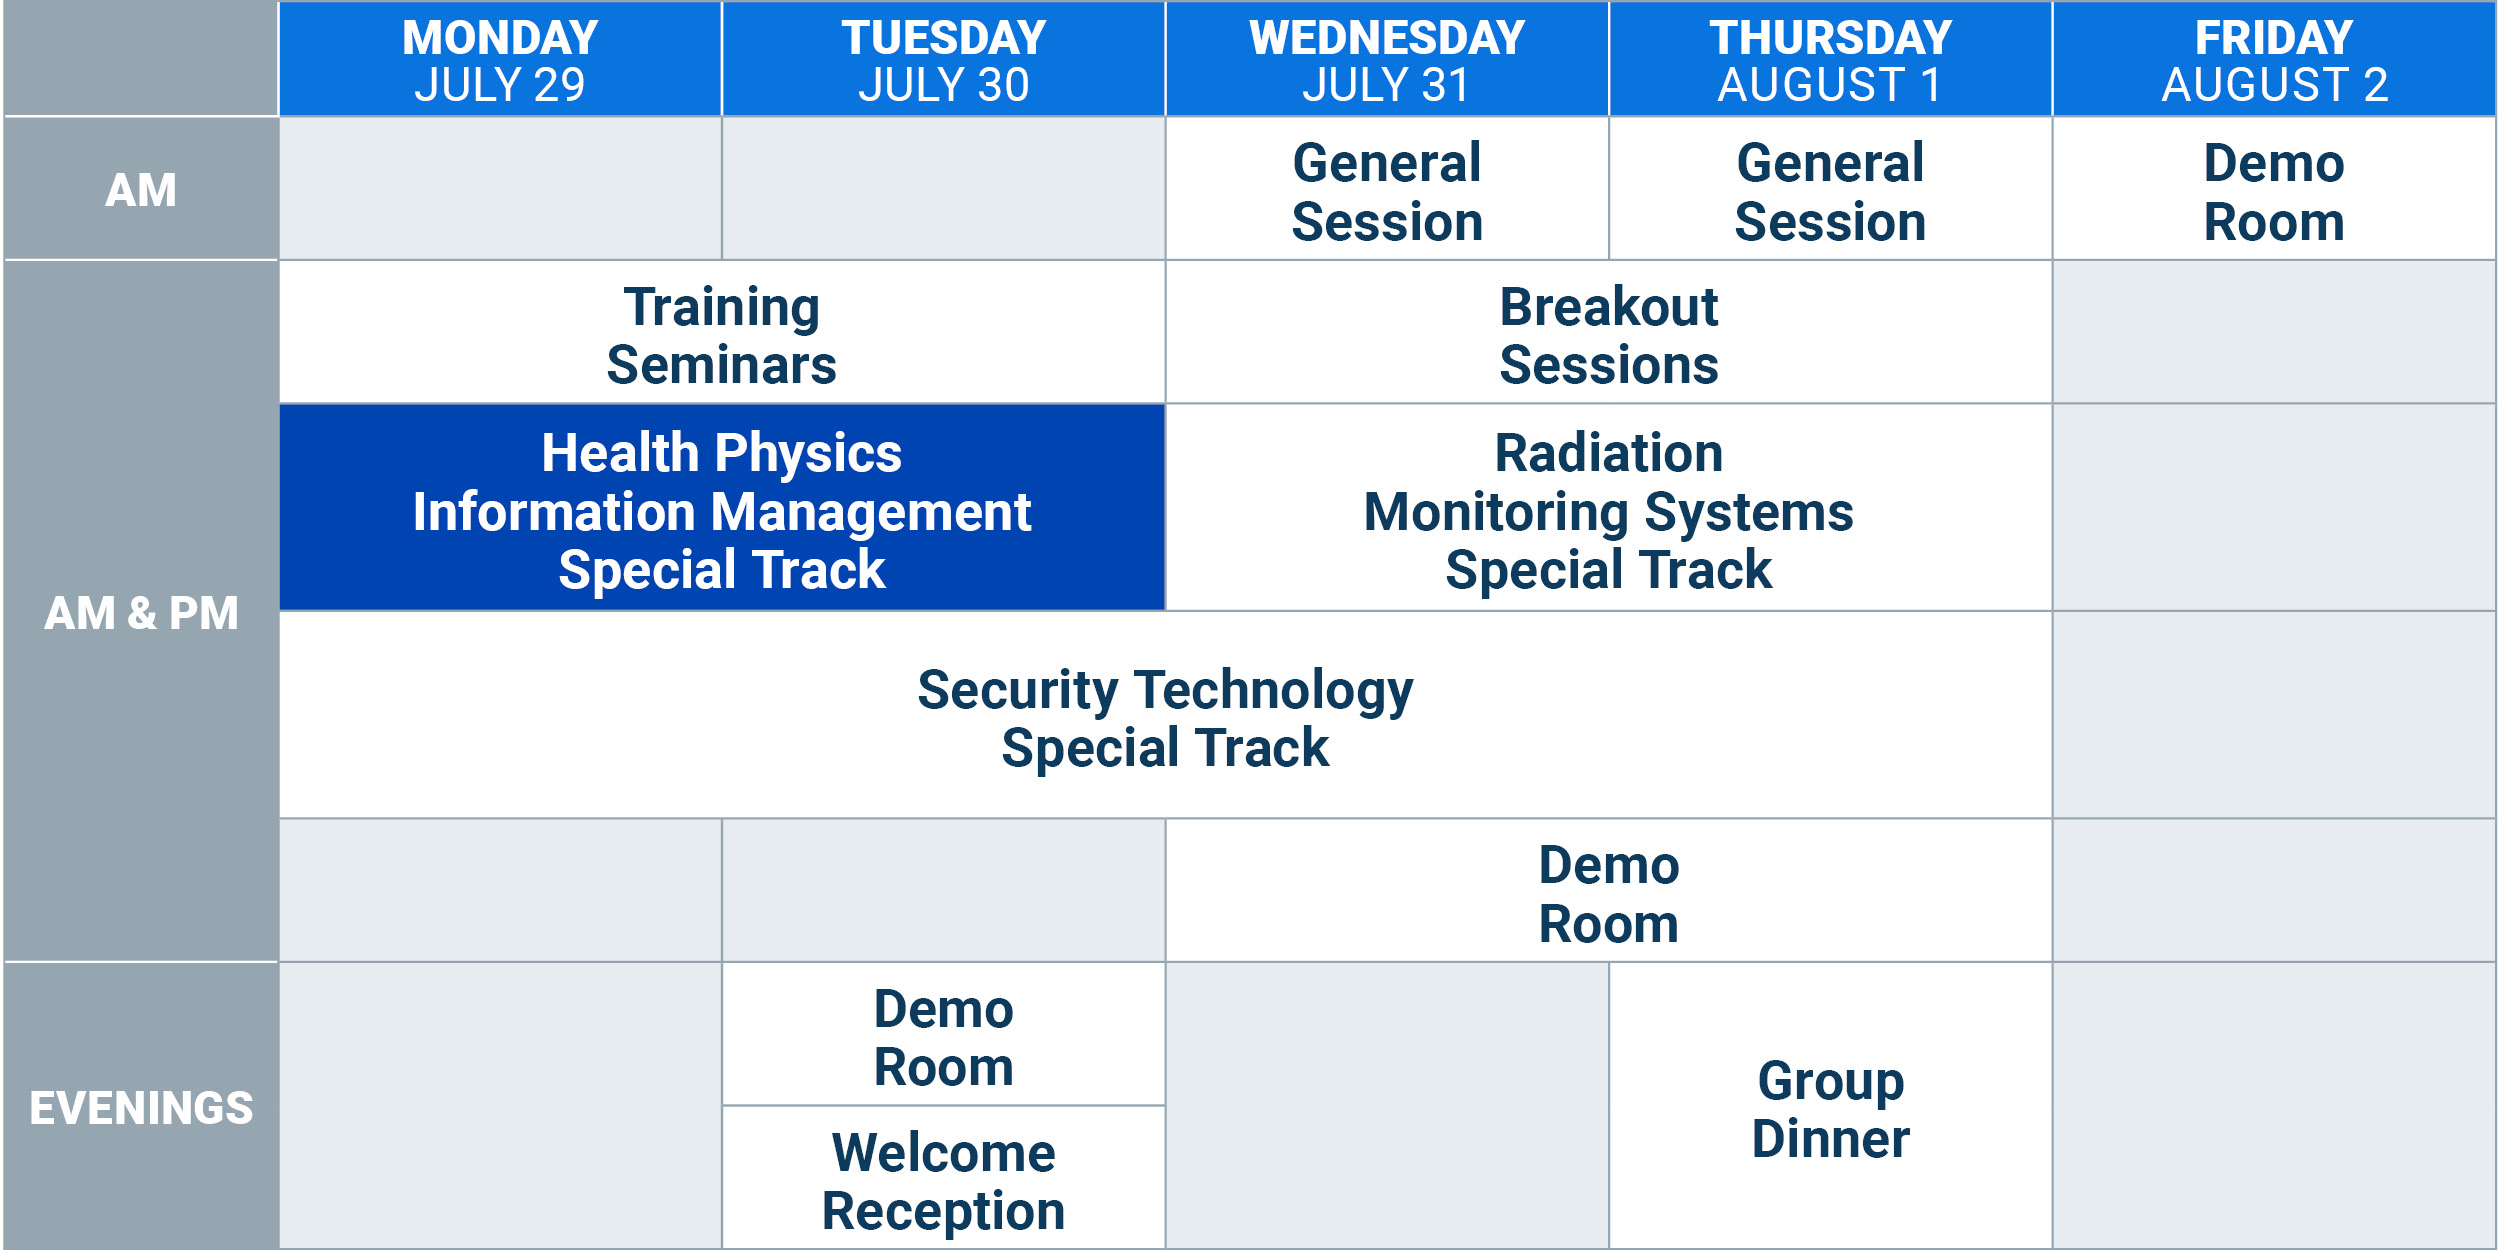 MC24_Health-Physics-Schedule at a glance